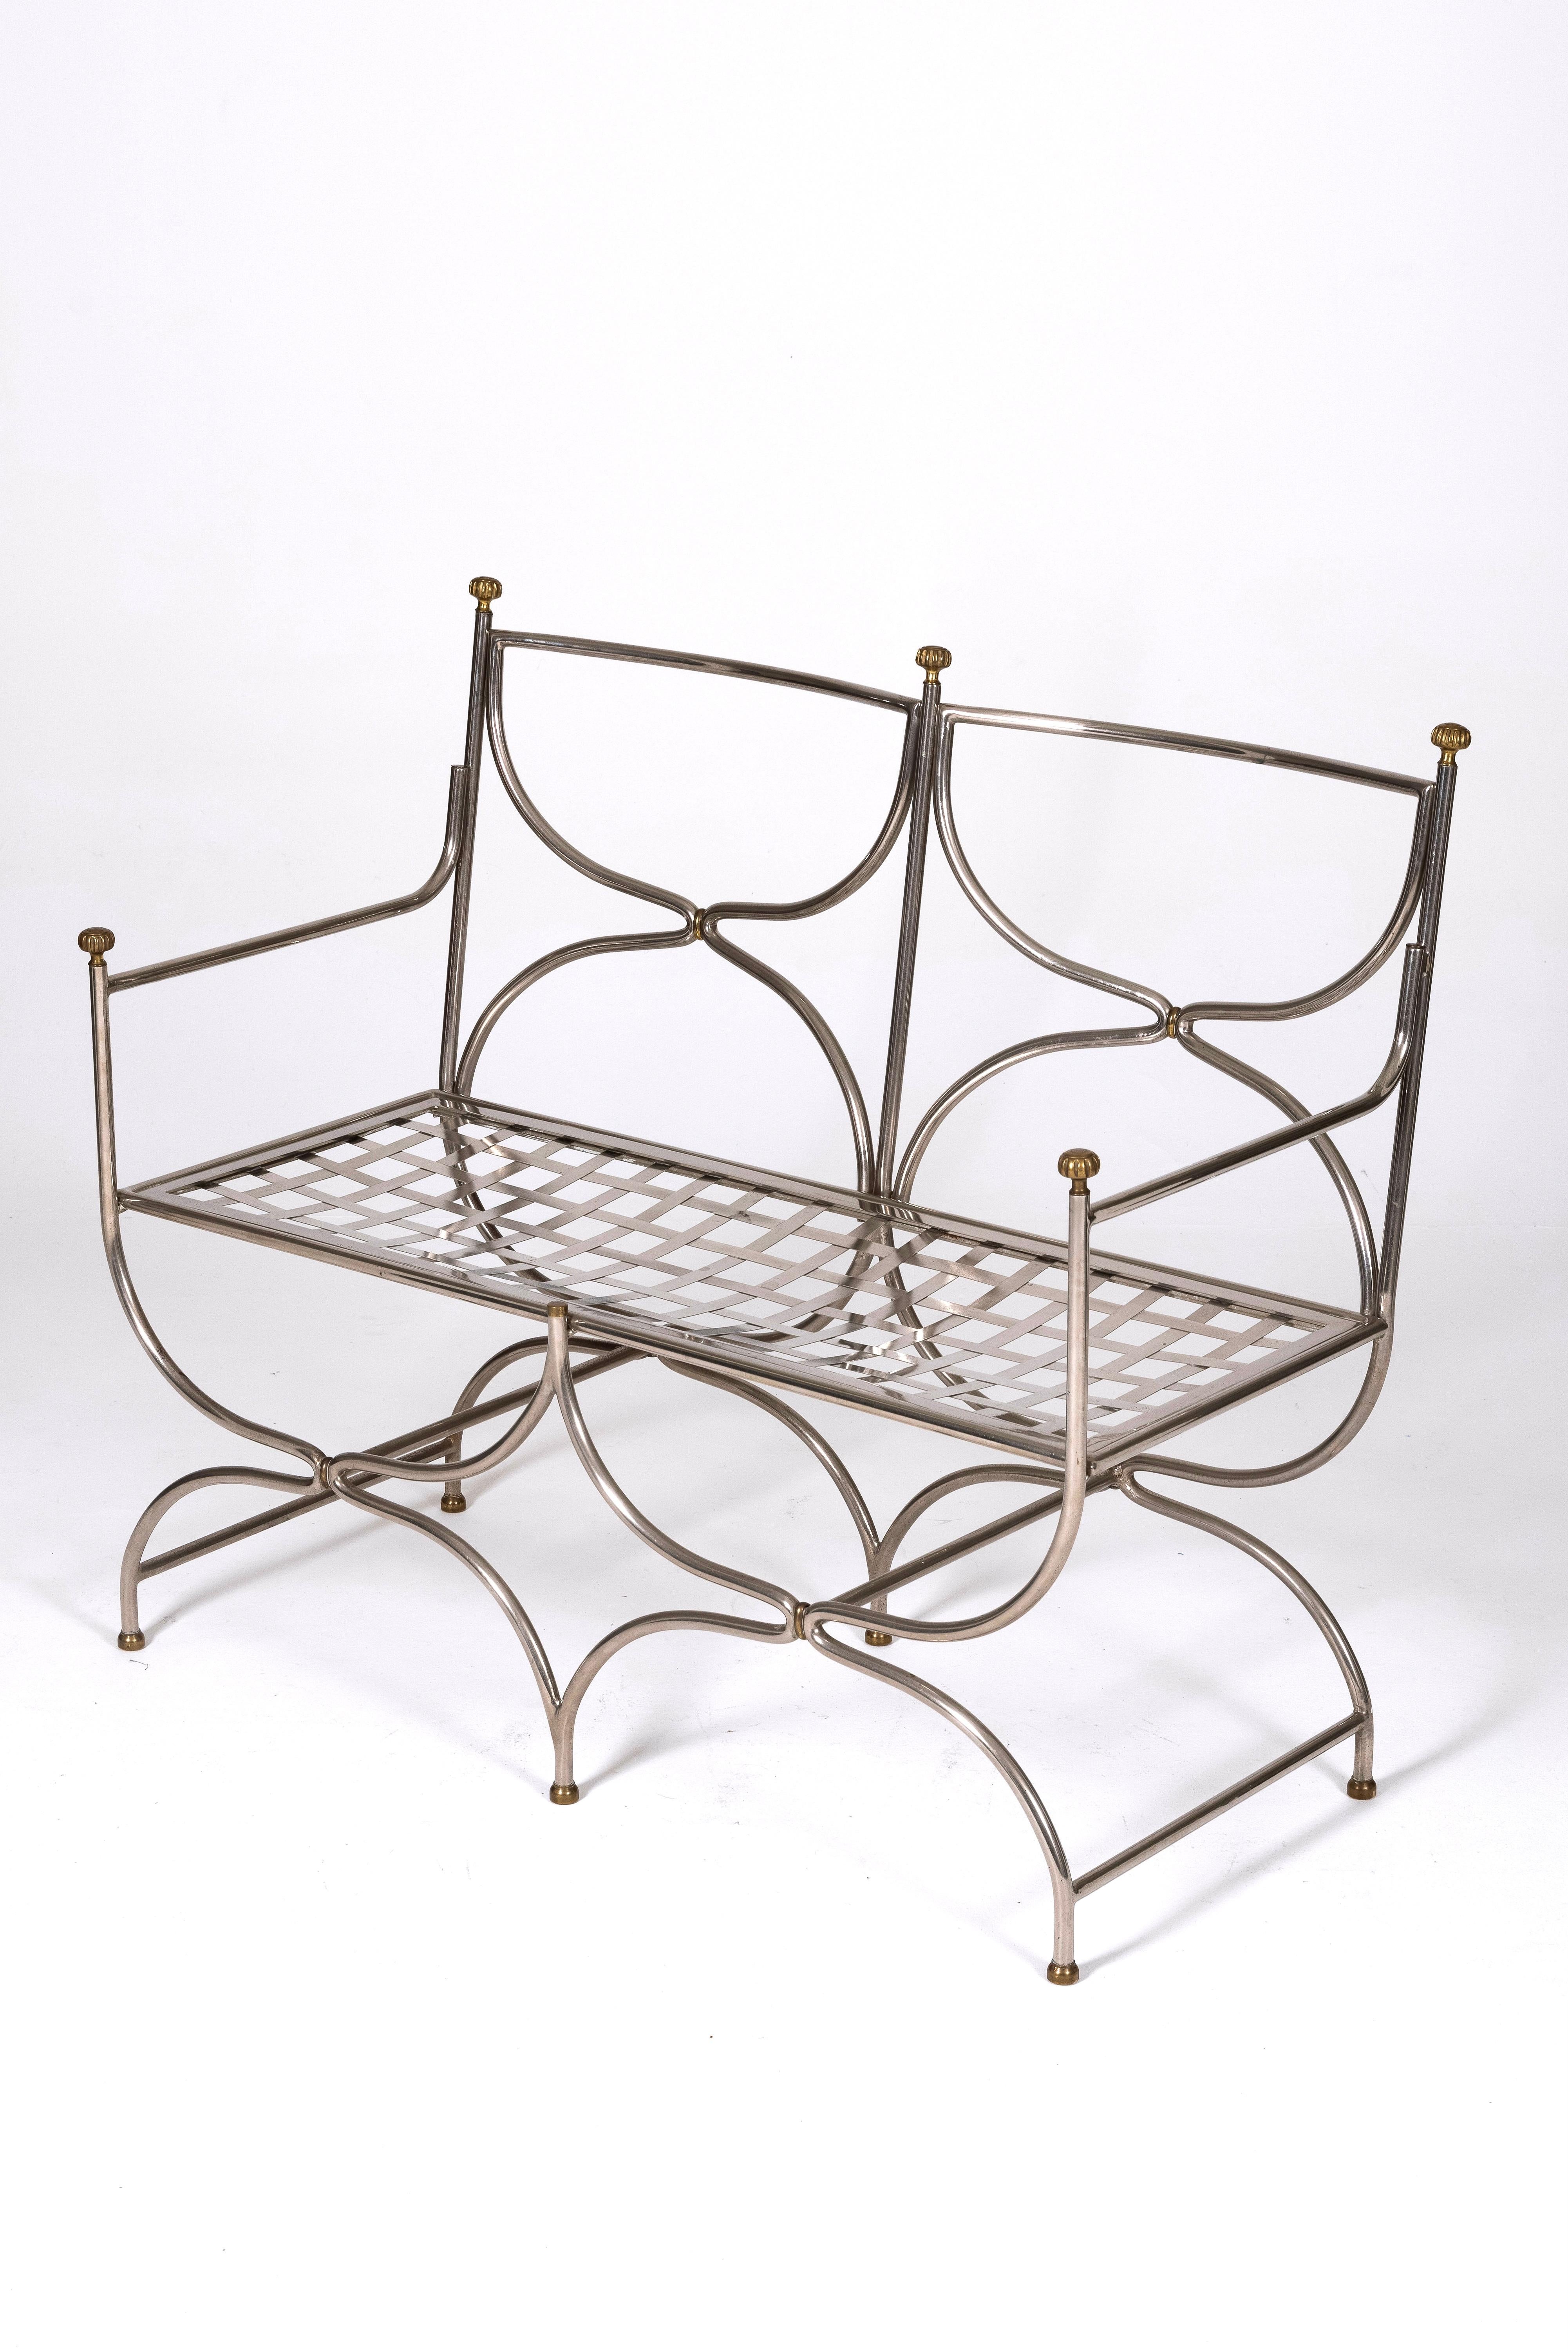 Steel and brass Curule Savonarola bench by the designer and publisher Maison Jansen, 1960s. 2-seater bench with a checkered steel seat and decorative brass elements. Very good condition.
LP1460